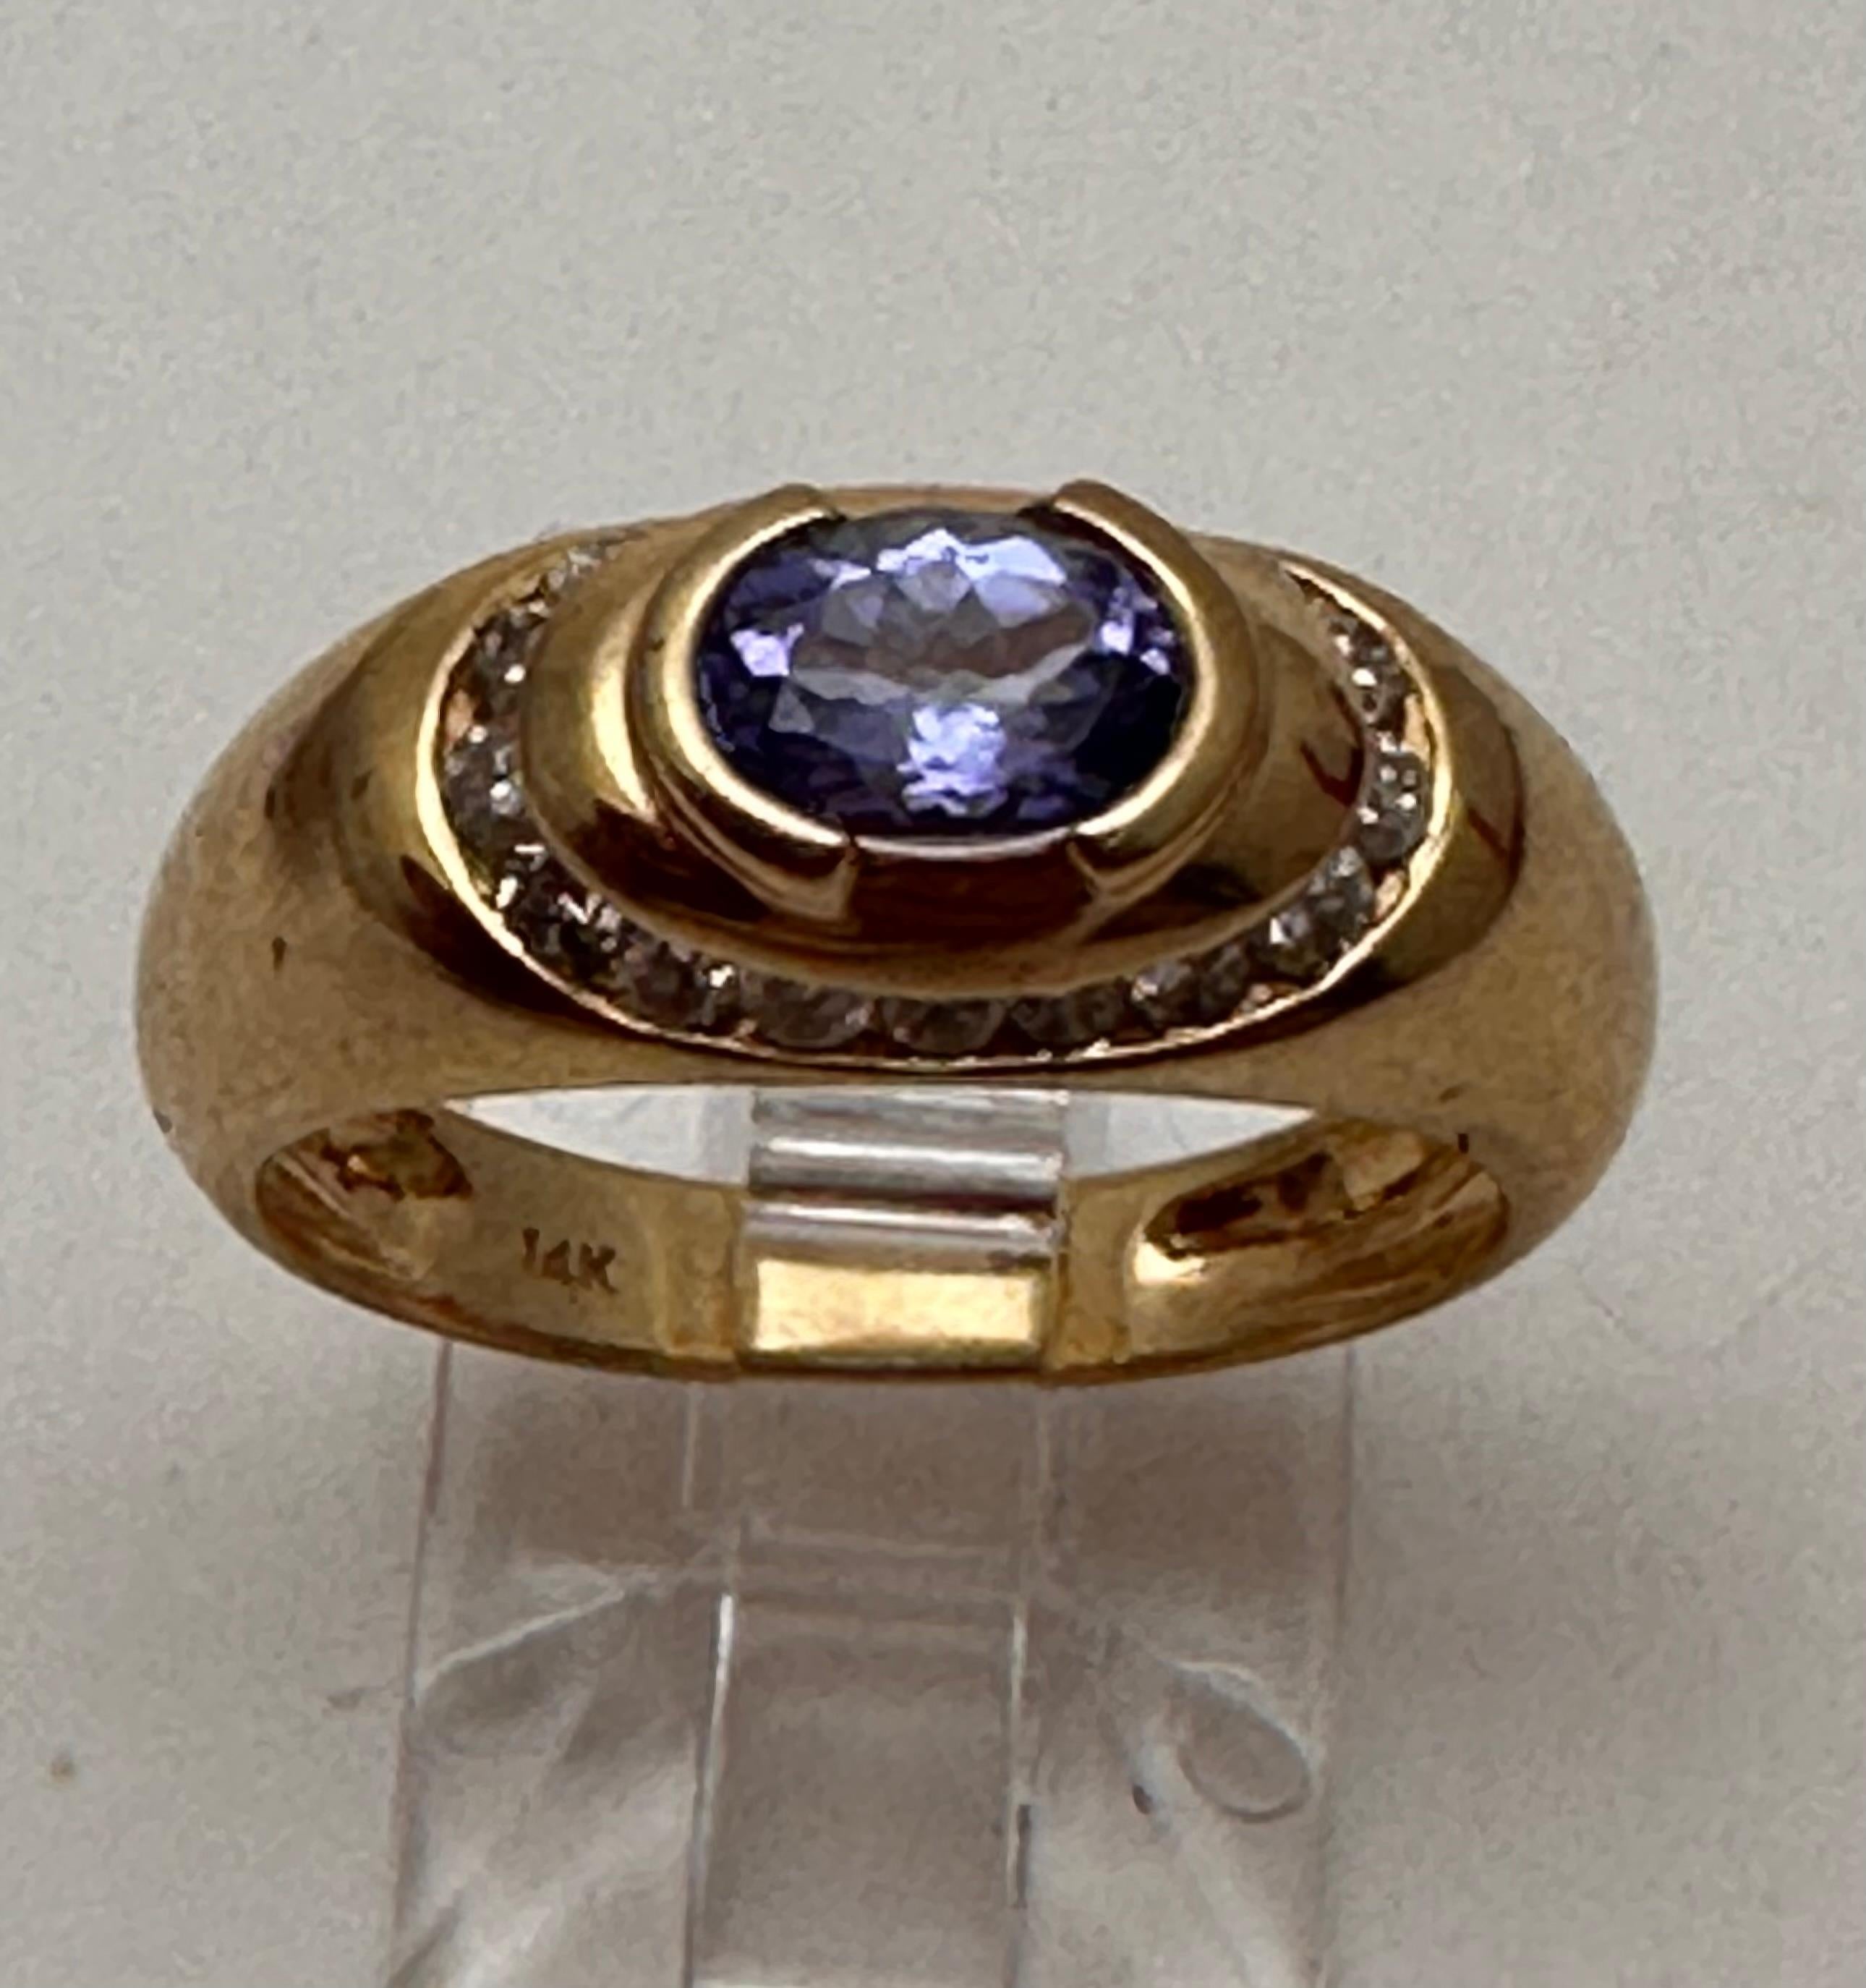 14k Yellow Gold 4mm x 6mm Oval Tanzanite 
surrounded by 17 Diamonds  
Ring Size 6 1/2

Tanzanite 

Tanzanite changes colors when it is viewed from different directions. This shifting of colors has been said to facilitate raising consciousness. It